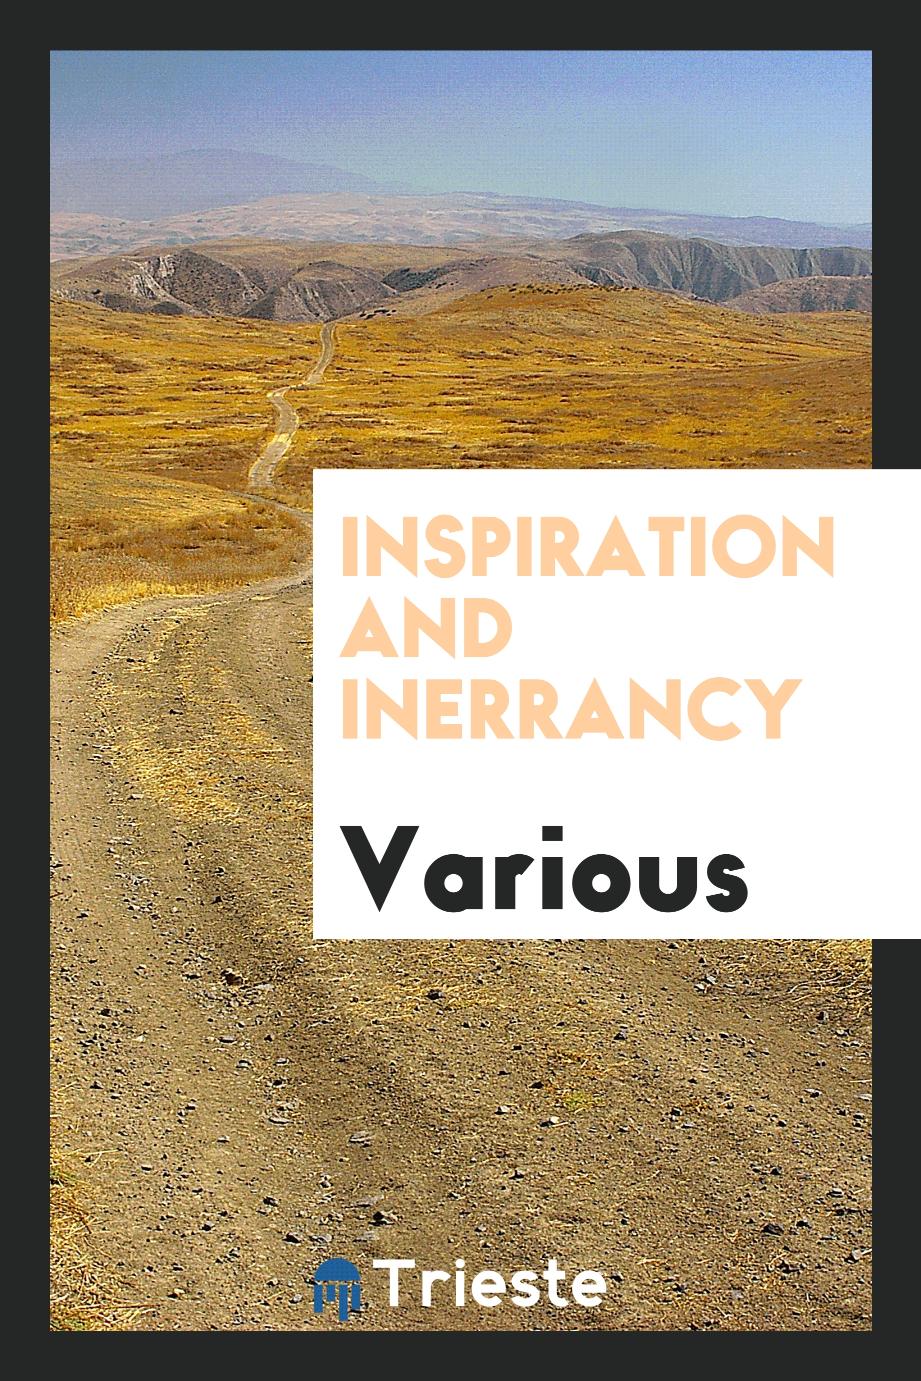 Inspiration and inerrancy